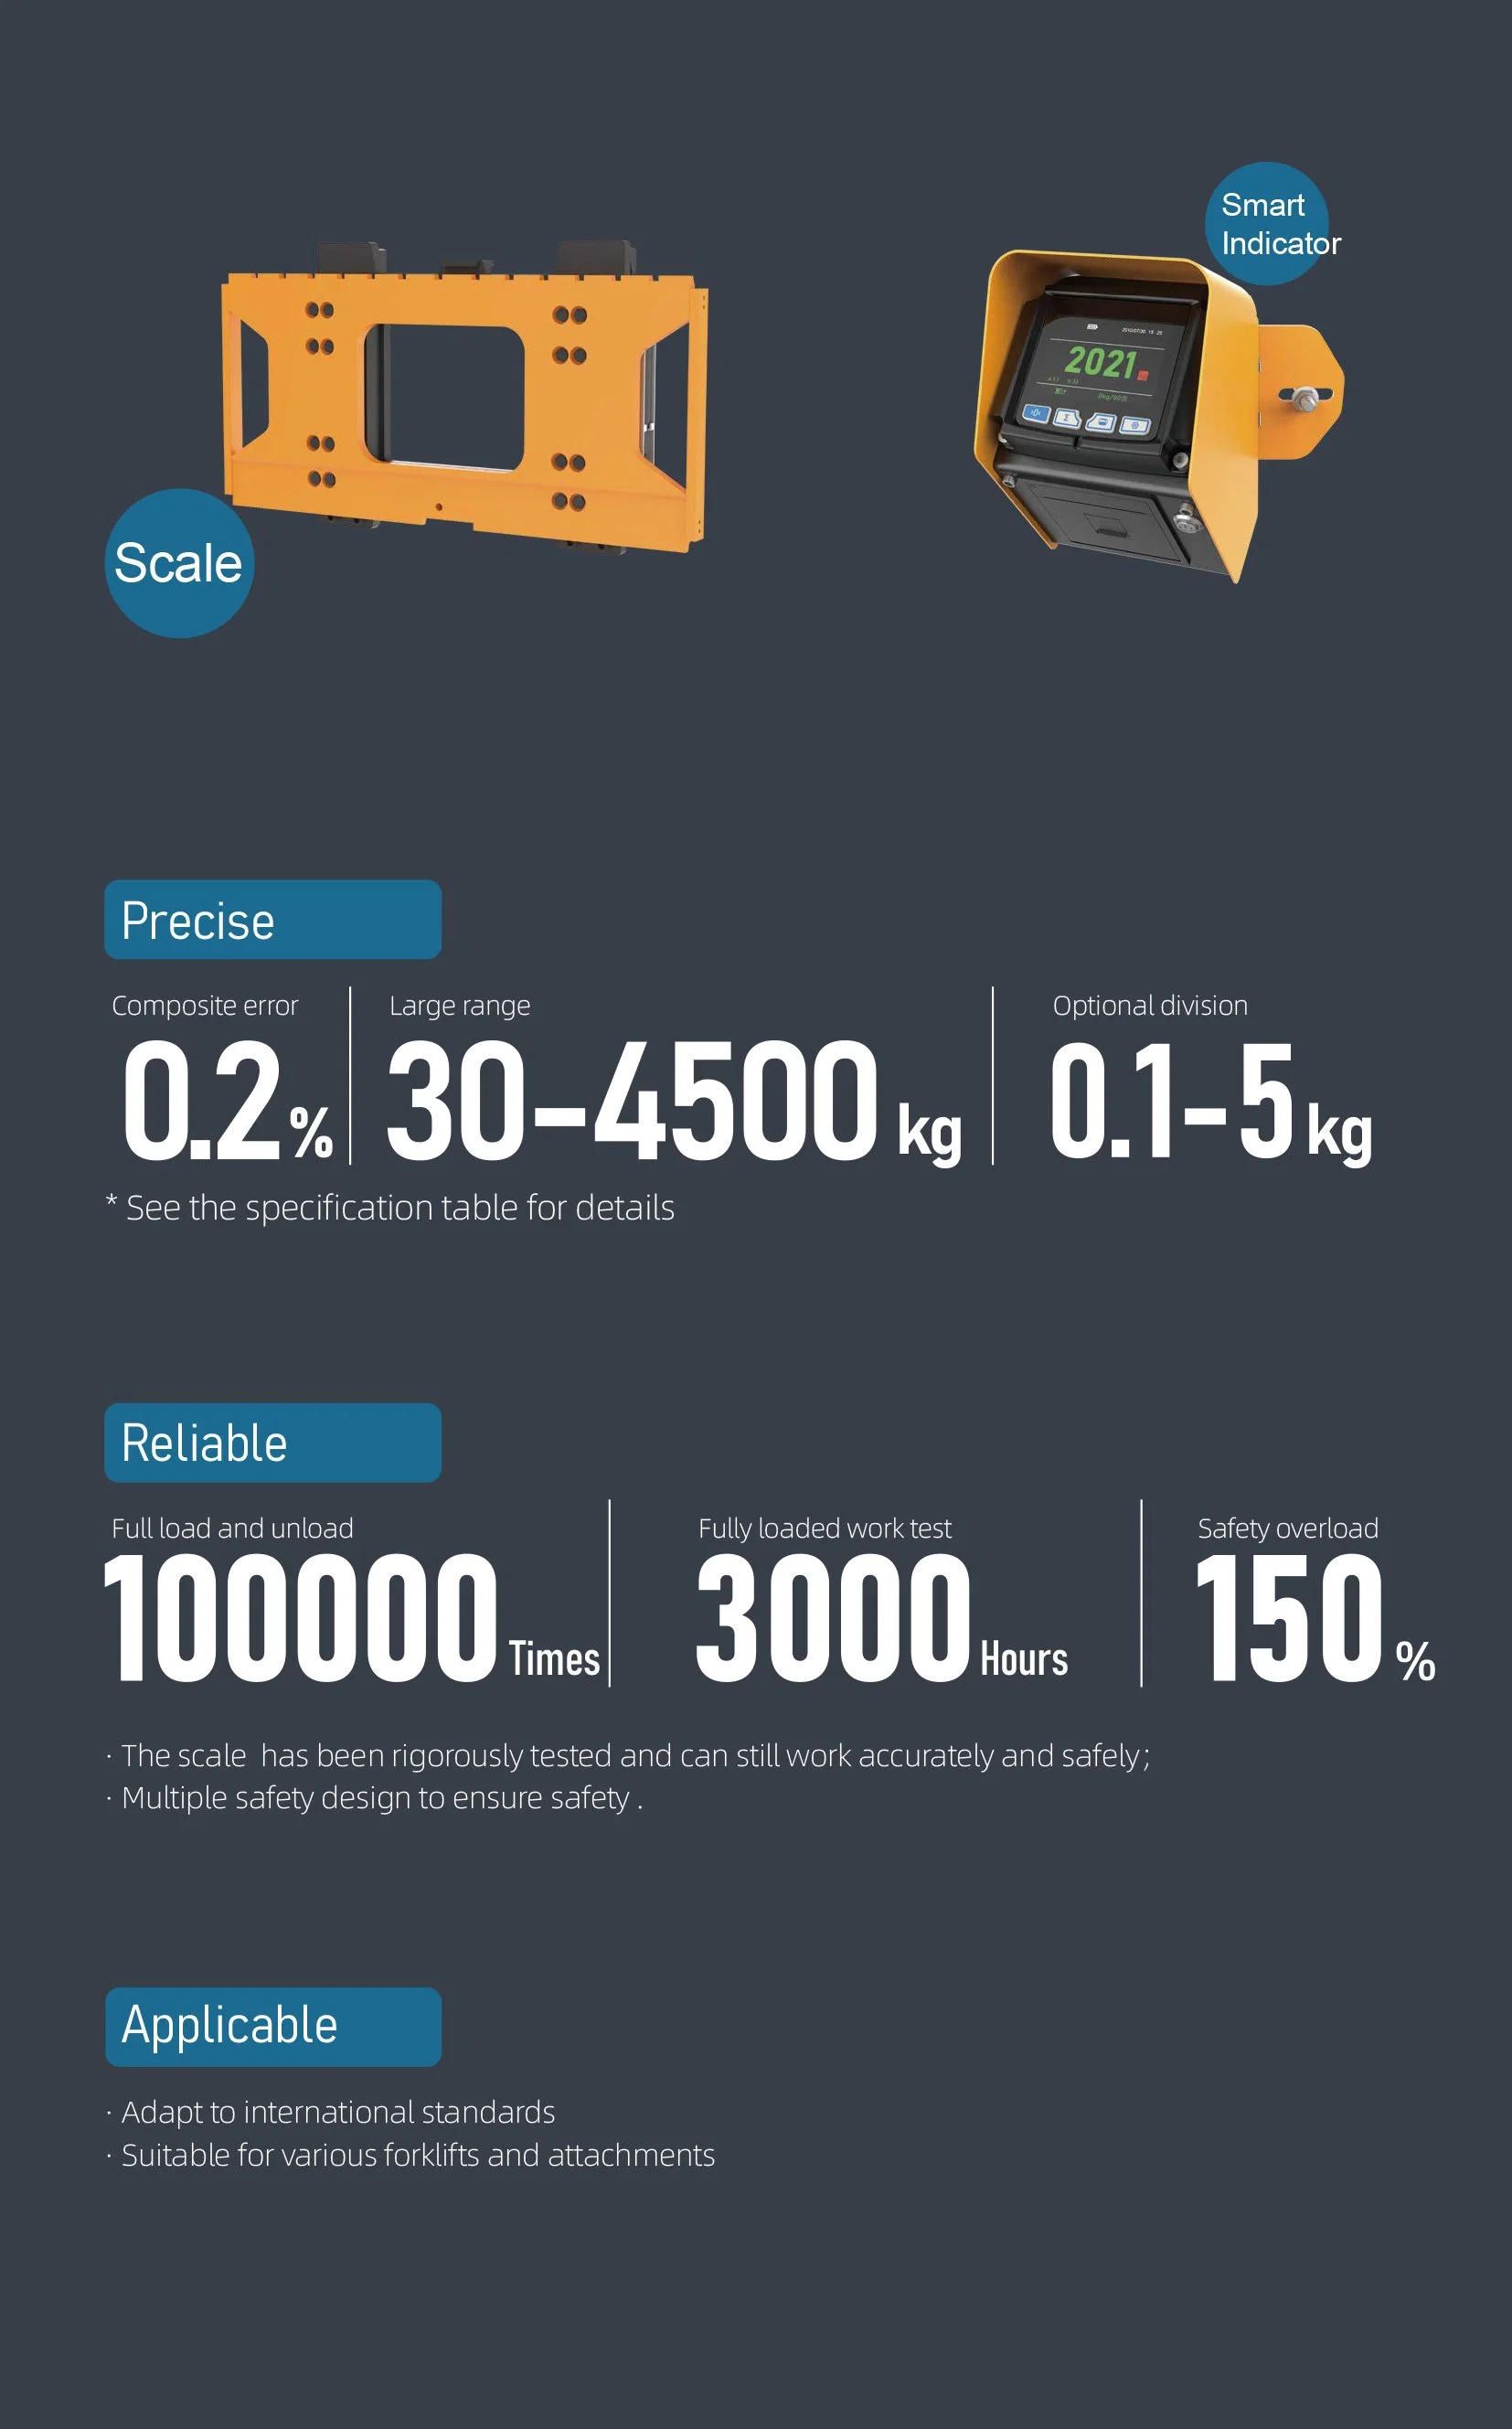 Forklift Truck Scales & Forklift Weight